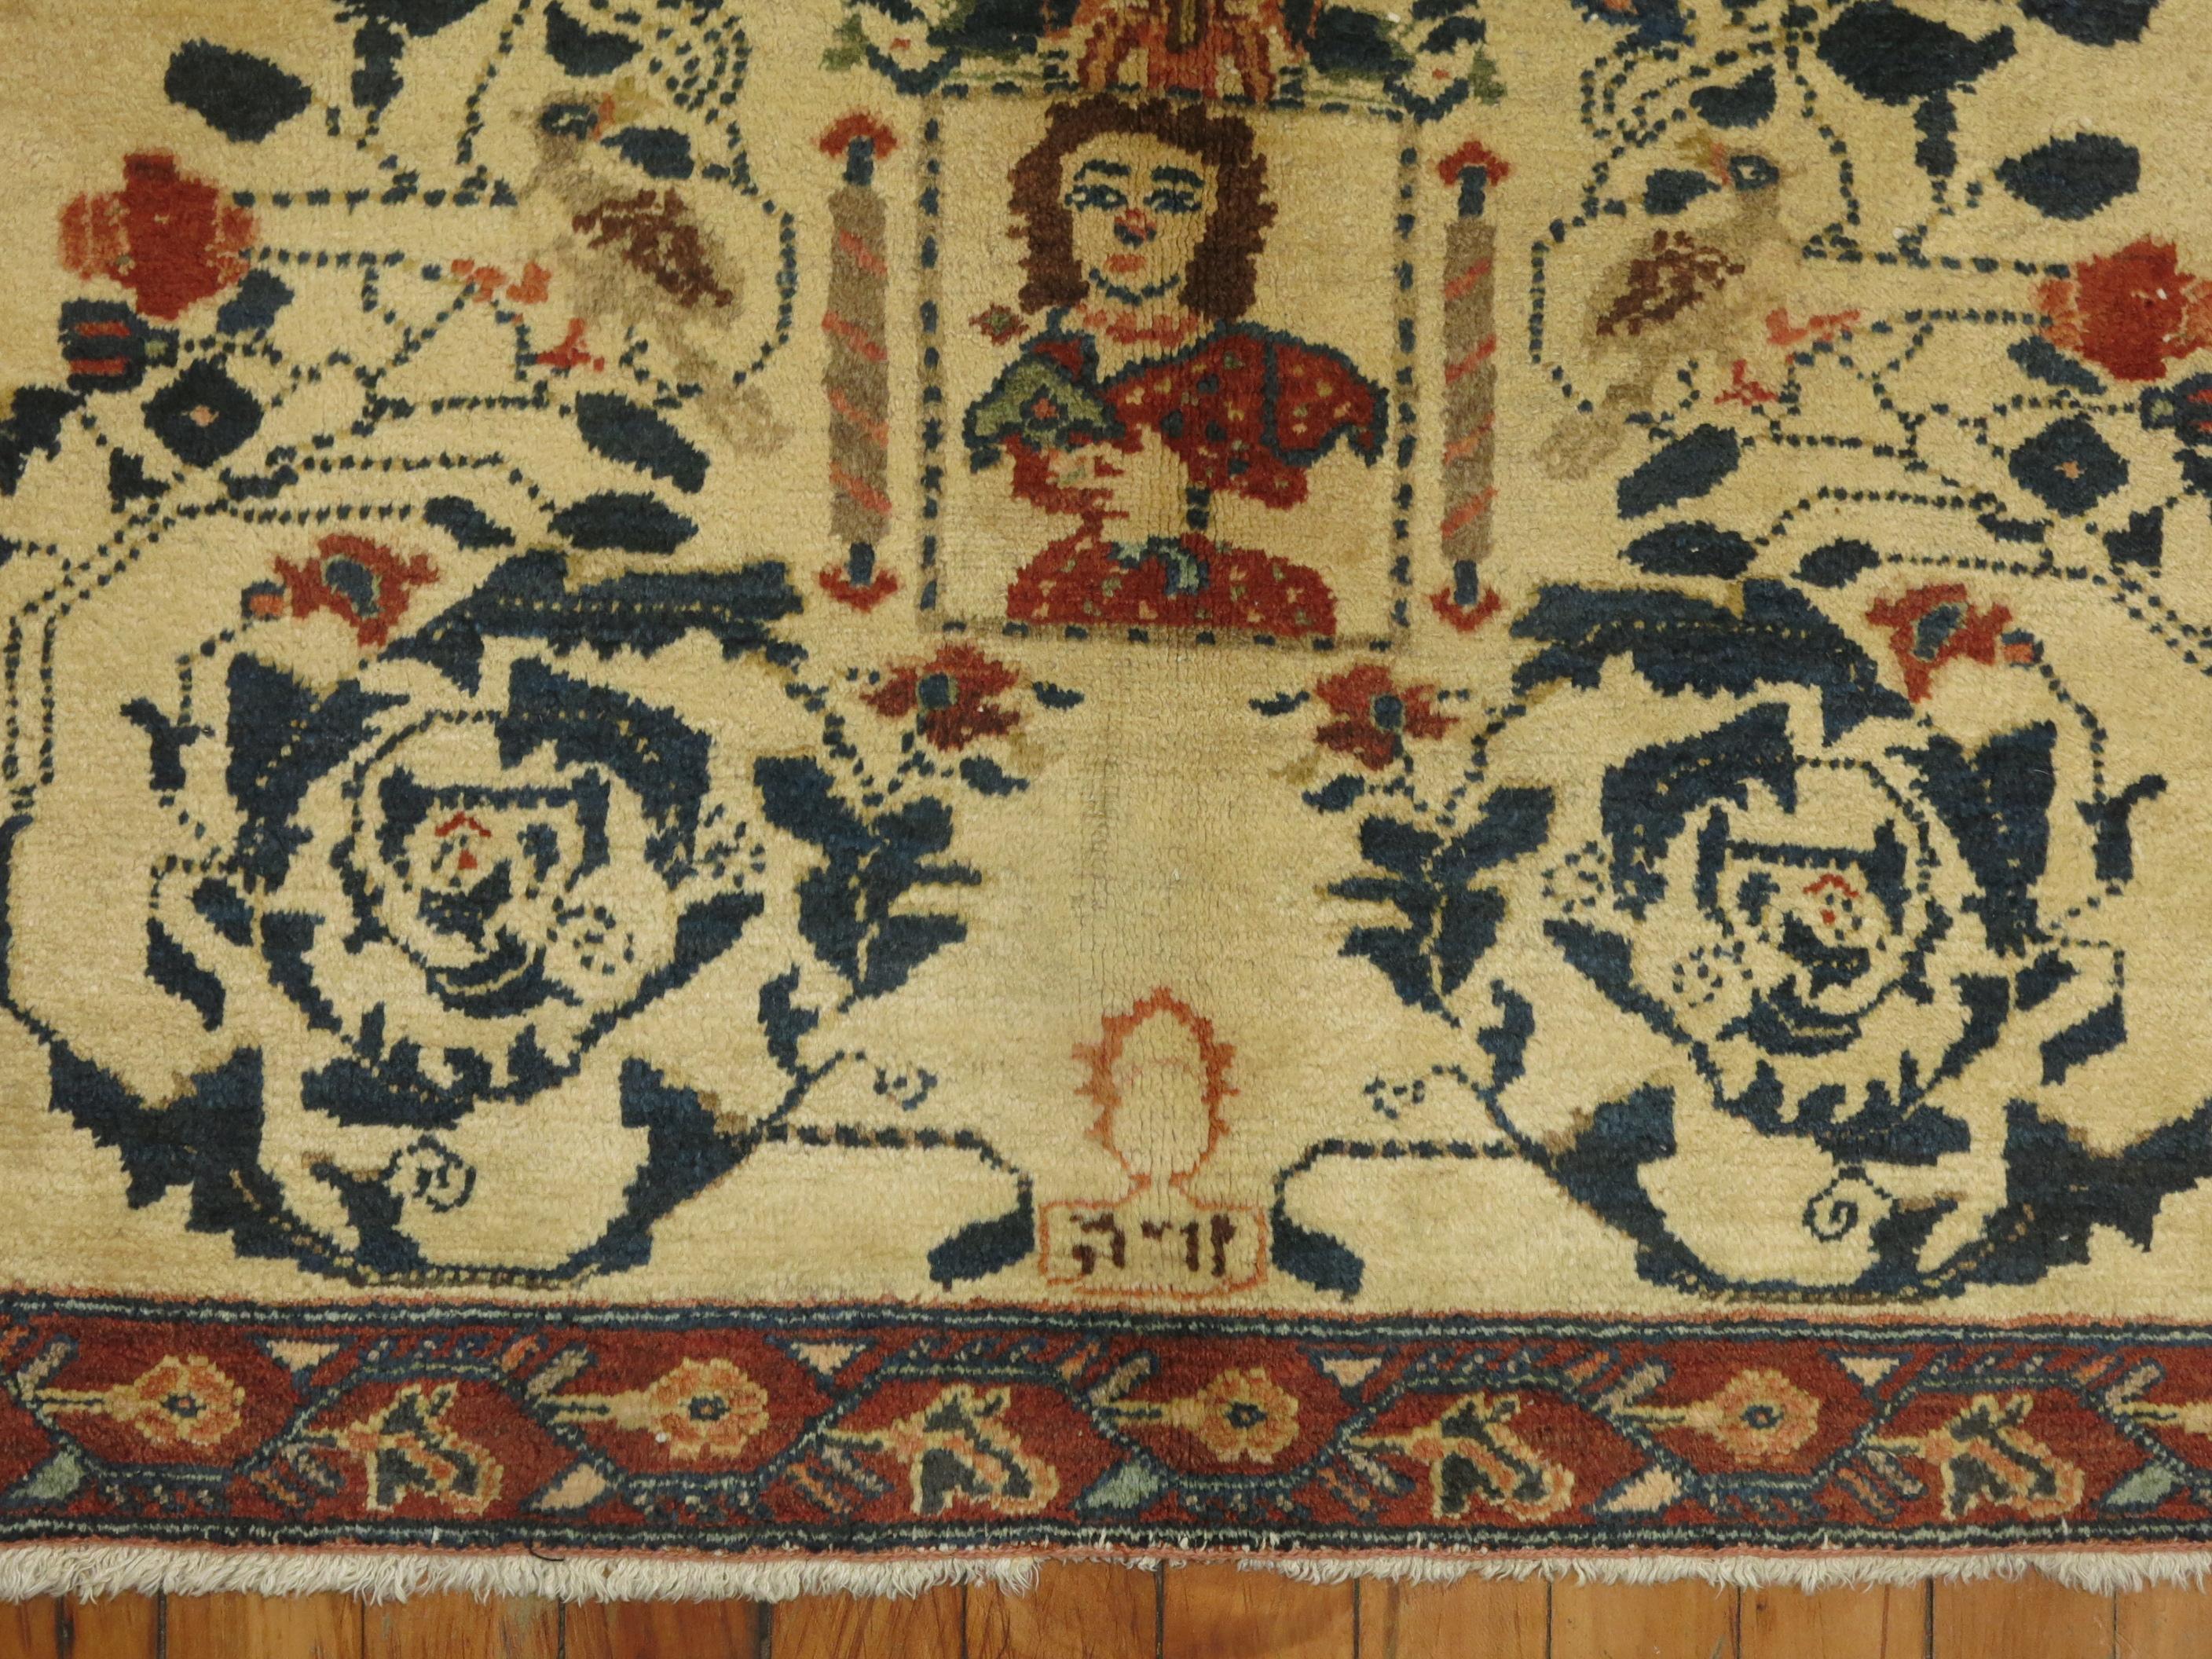 An authentic 20th century Persian Pictorial rug with what looks like a hebrew inscription.